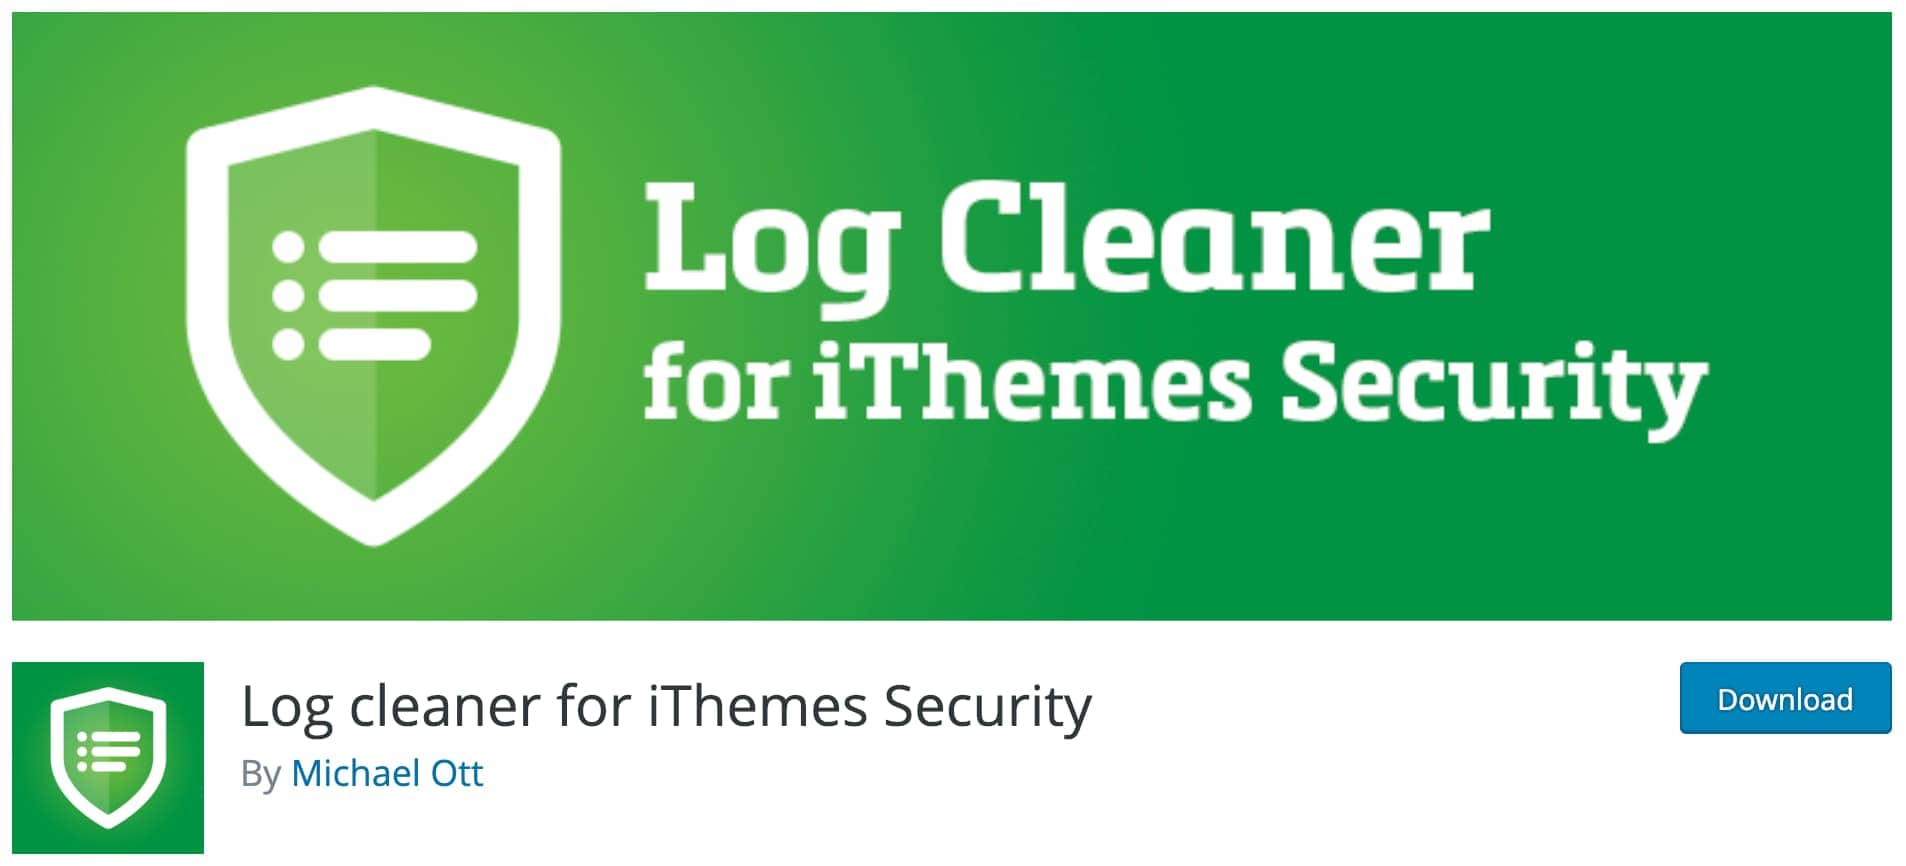 Log-cleaner-for-iThemes-Security-Cover